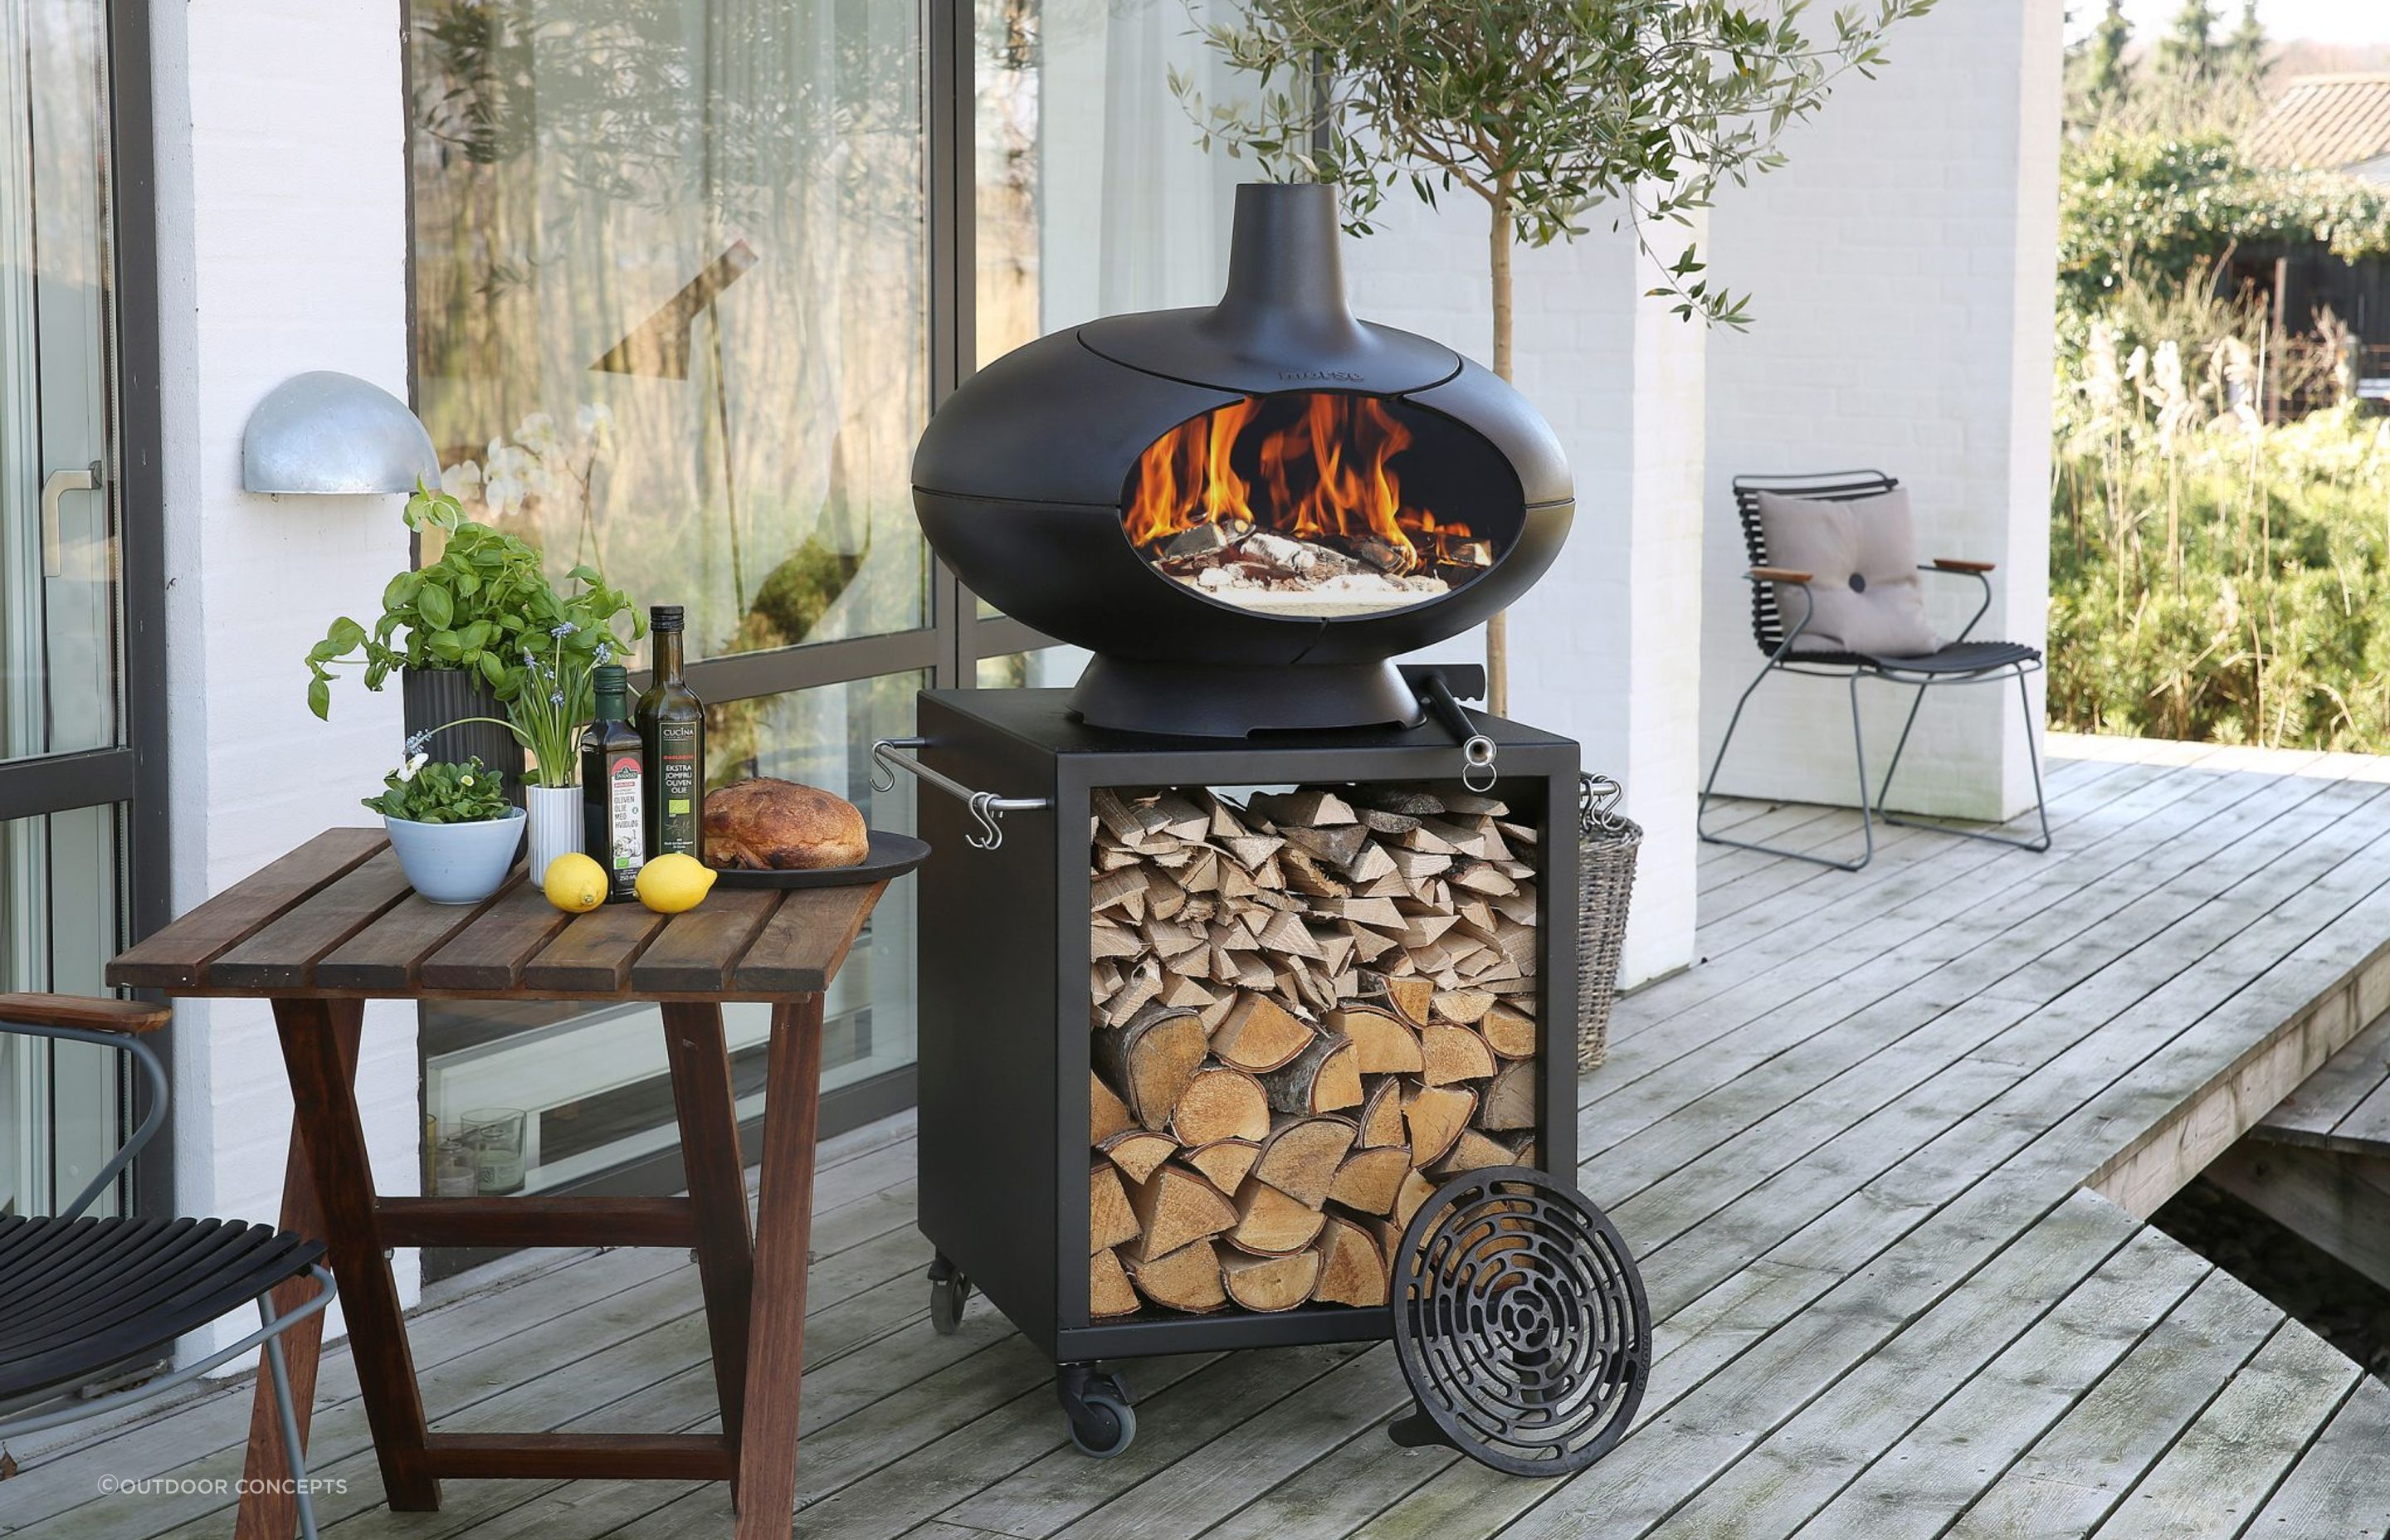 Using its steel doors the Forno Terra Set by Morsø turns into the perfect outdoor smoker.